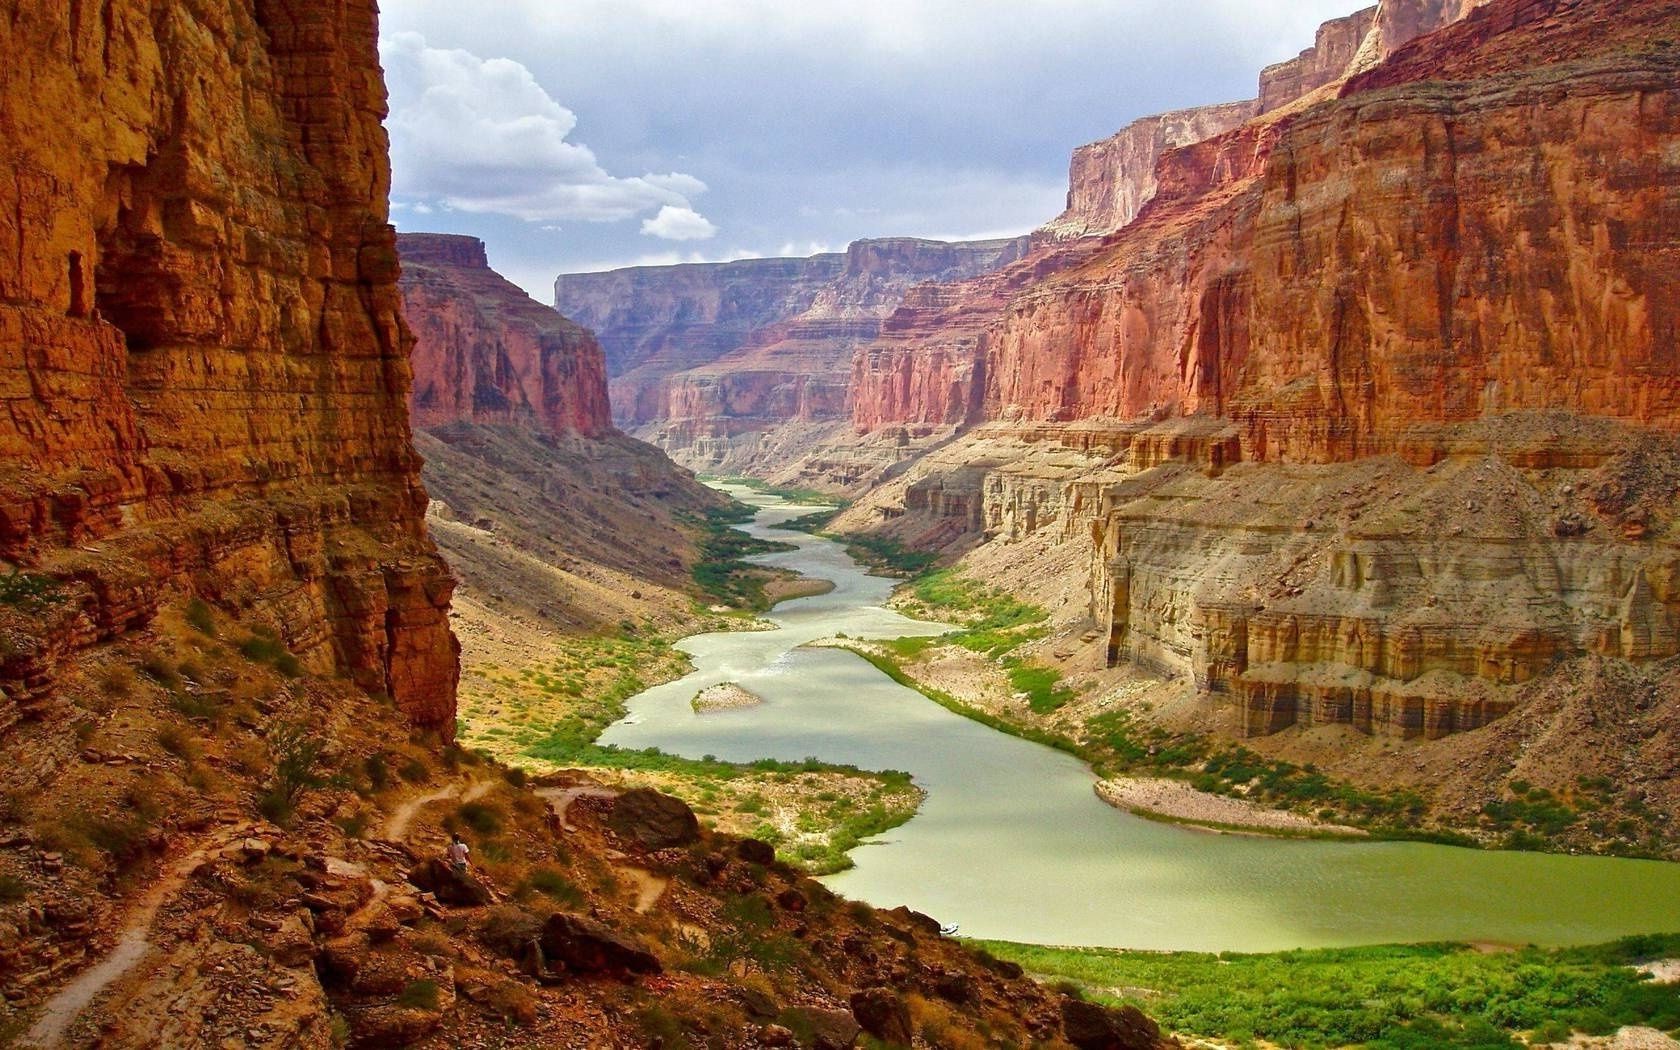 rivers ponds and streams canyon sandstone landscape geology erosion scenic valley rock travel nature park desert cliff grand outdoors mountain plateau river geological formation